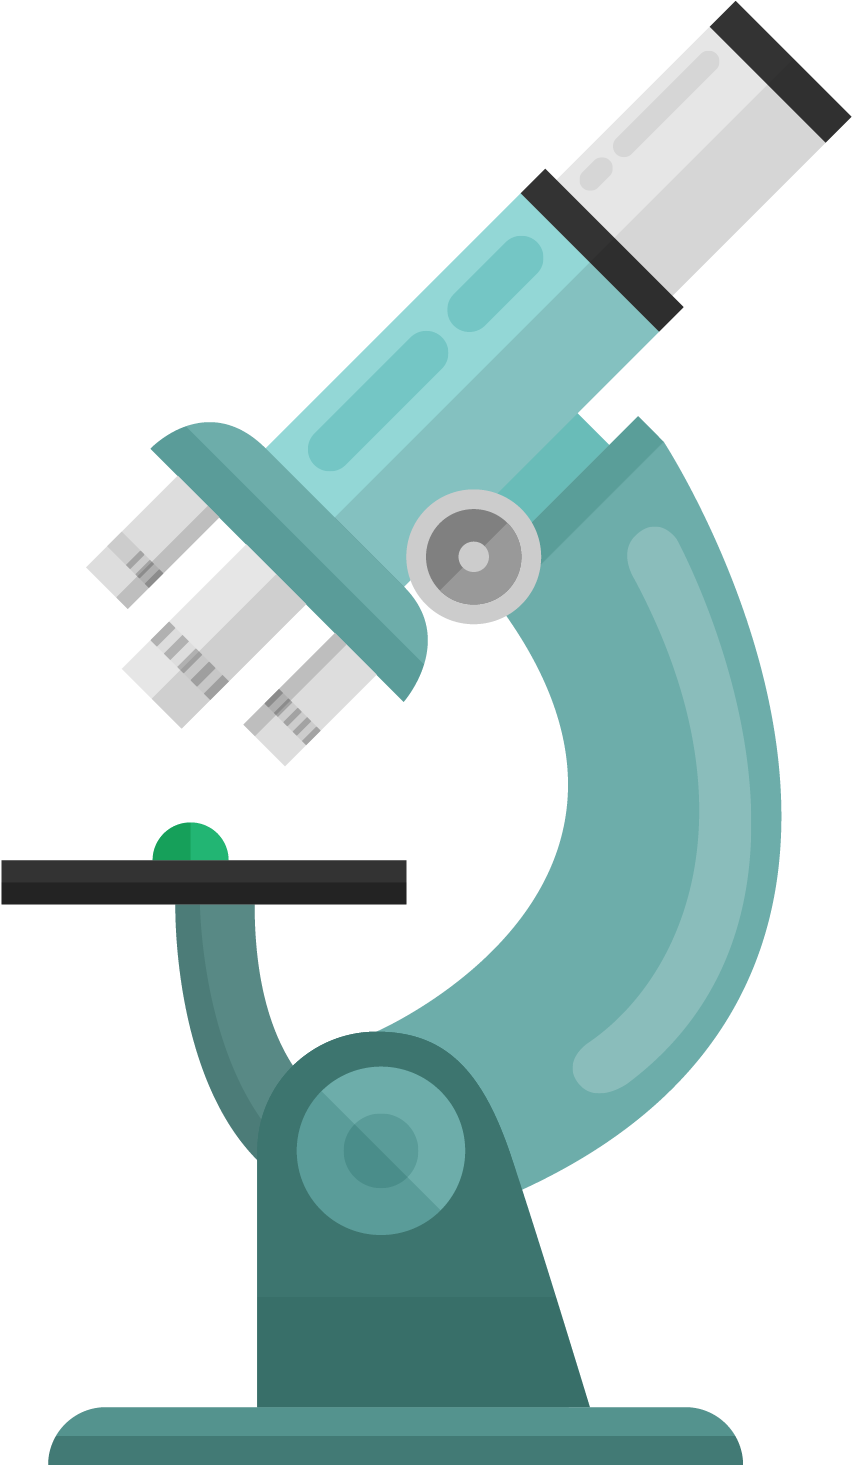 Microscope Image Processing - Microscope Vector Png (1500x1500)